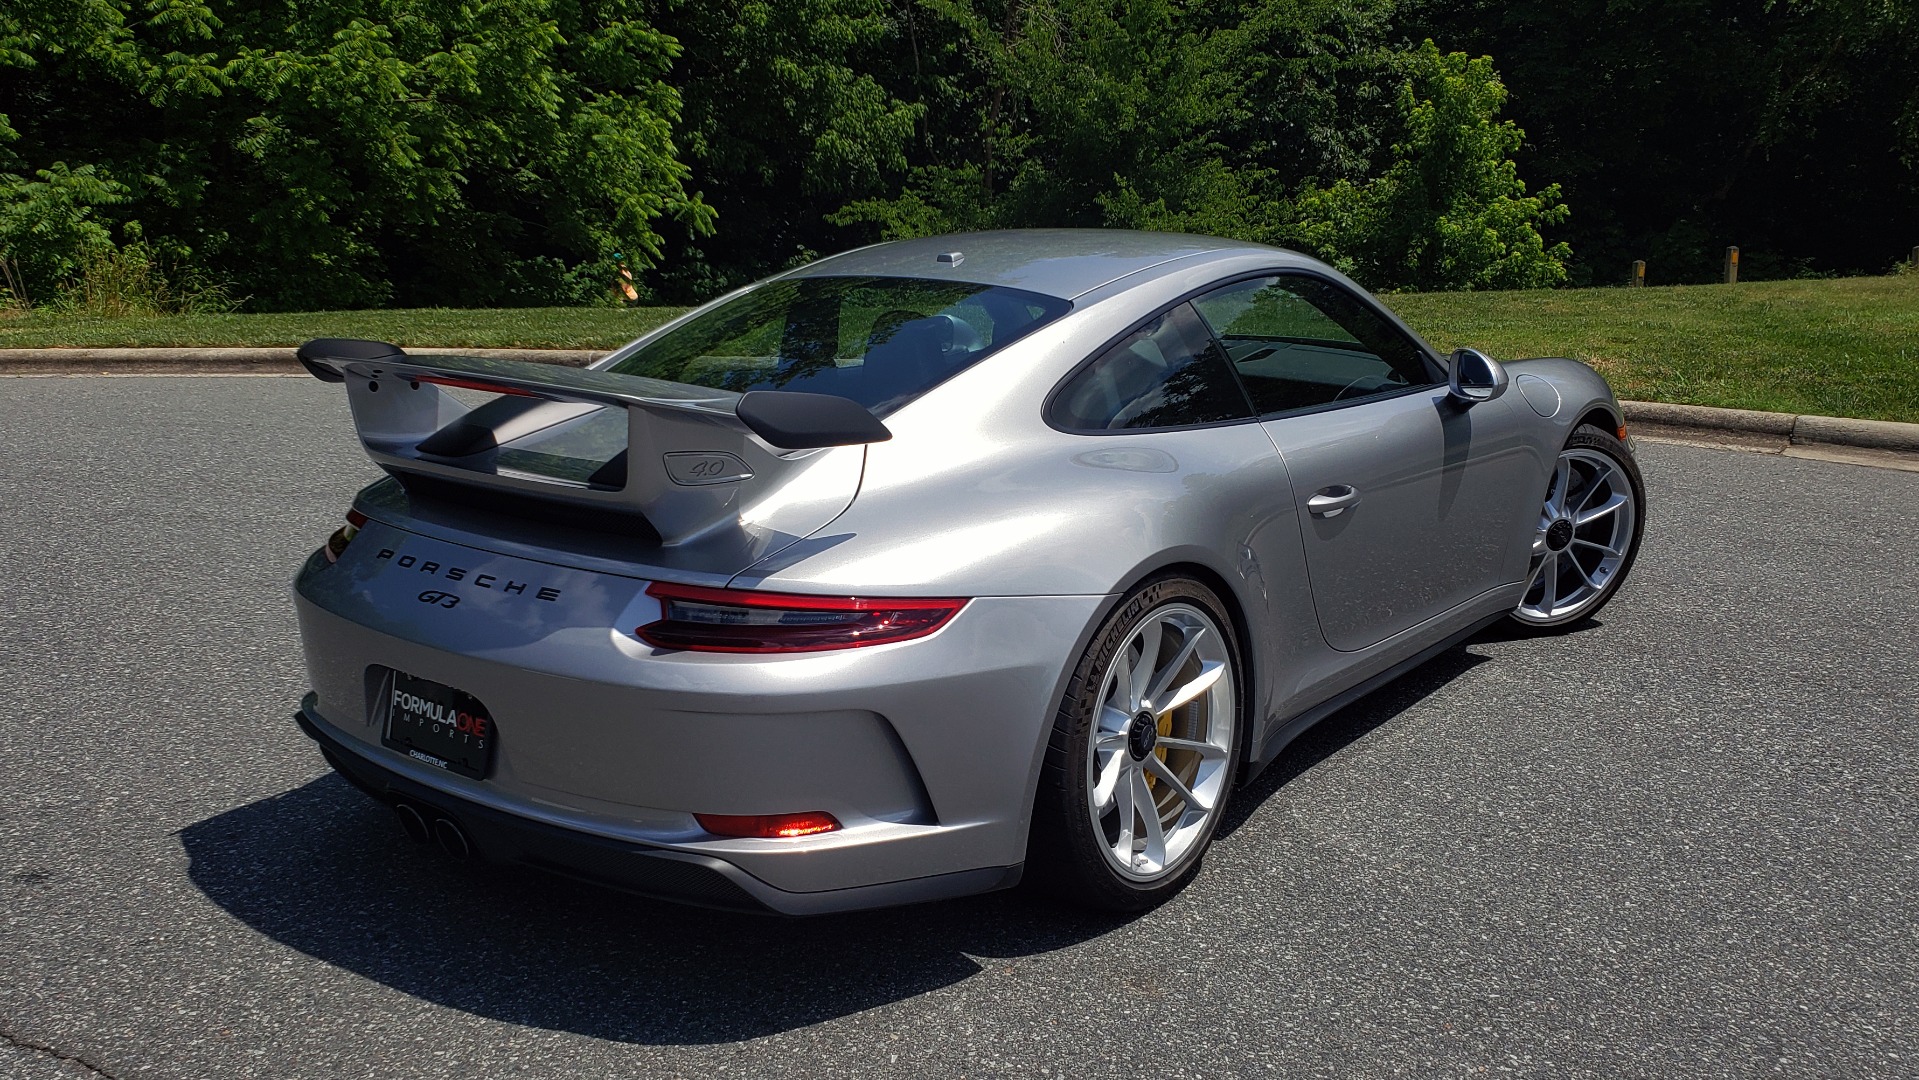 Used 2018 Porsche 911 GT3 4.0L 500HP / 6-SPD MNL / NAV / REARVIEW / PCCB for sale Sold at Formula Imports in Charlotte NC 28227 6